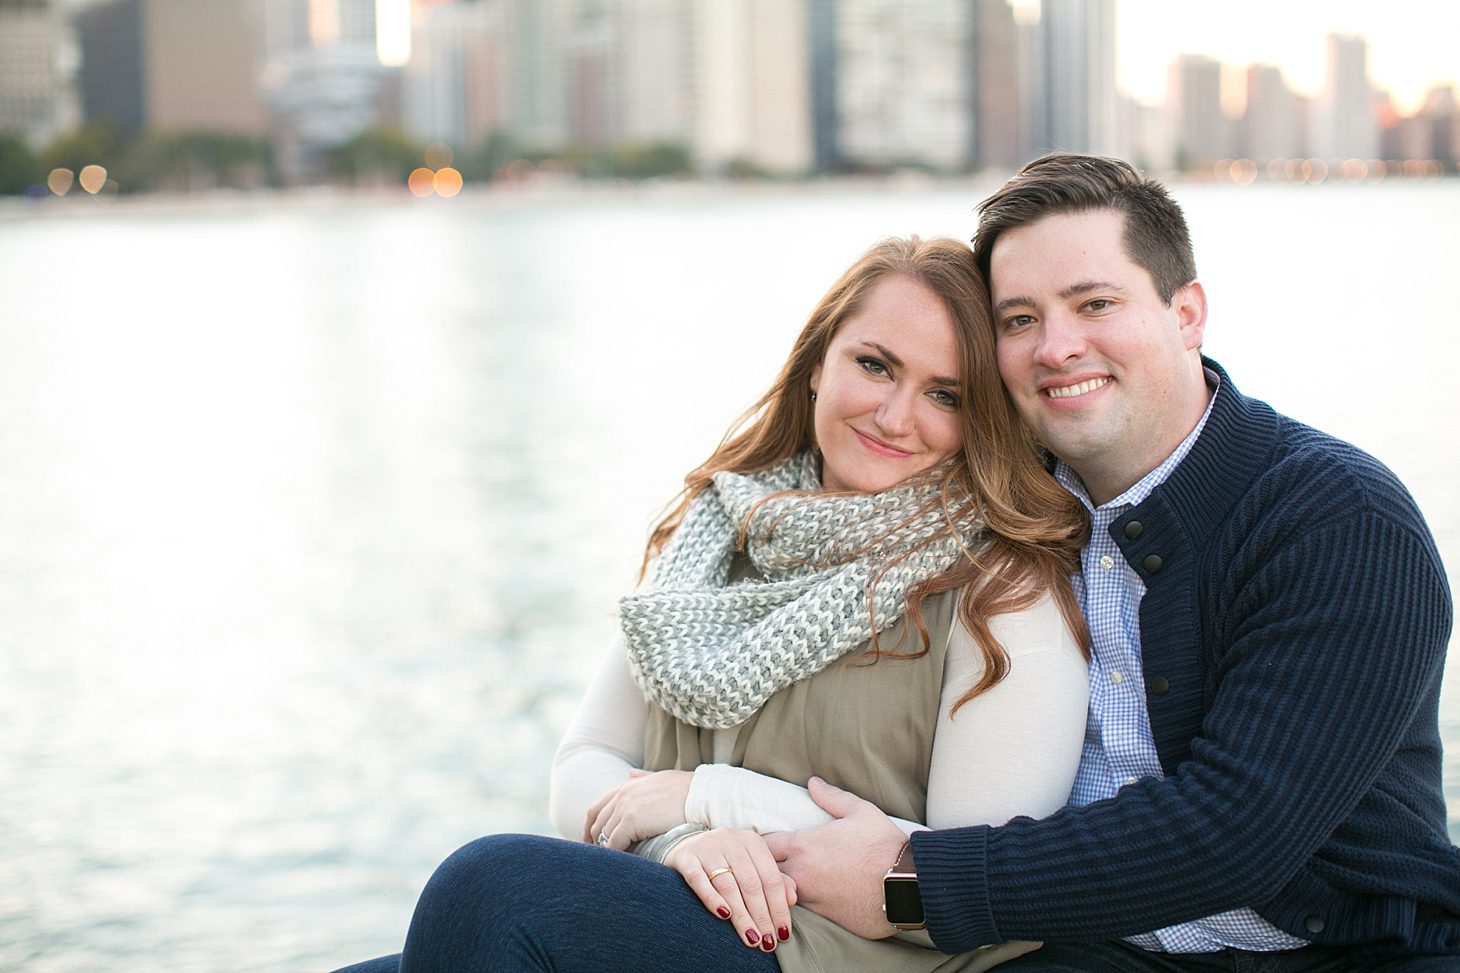 olive-park-engagement-photos-by-christy-tyler-photography_0023